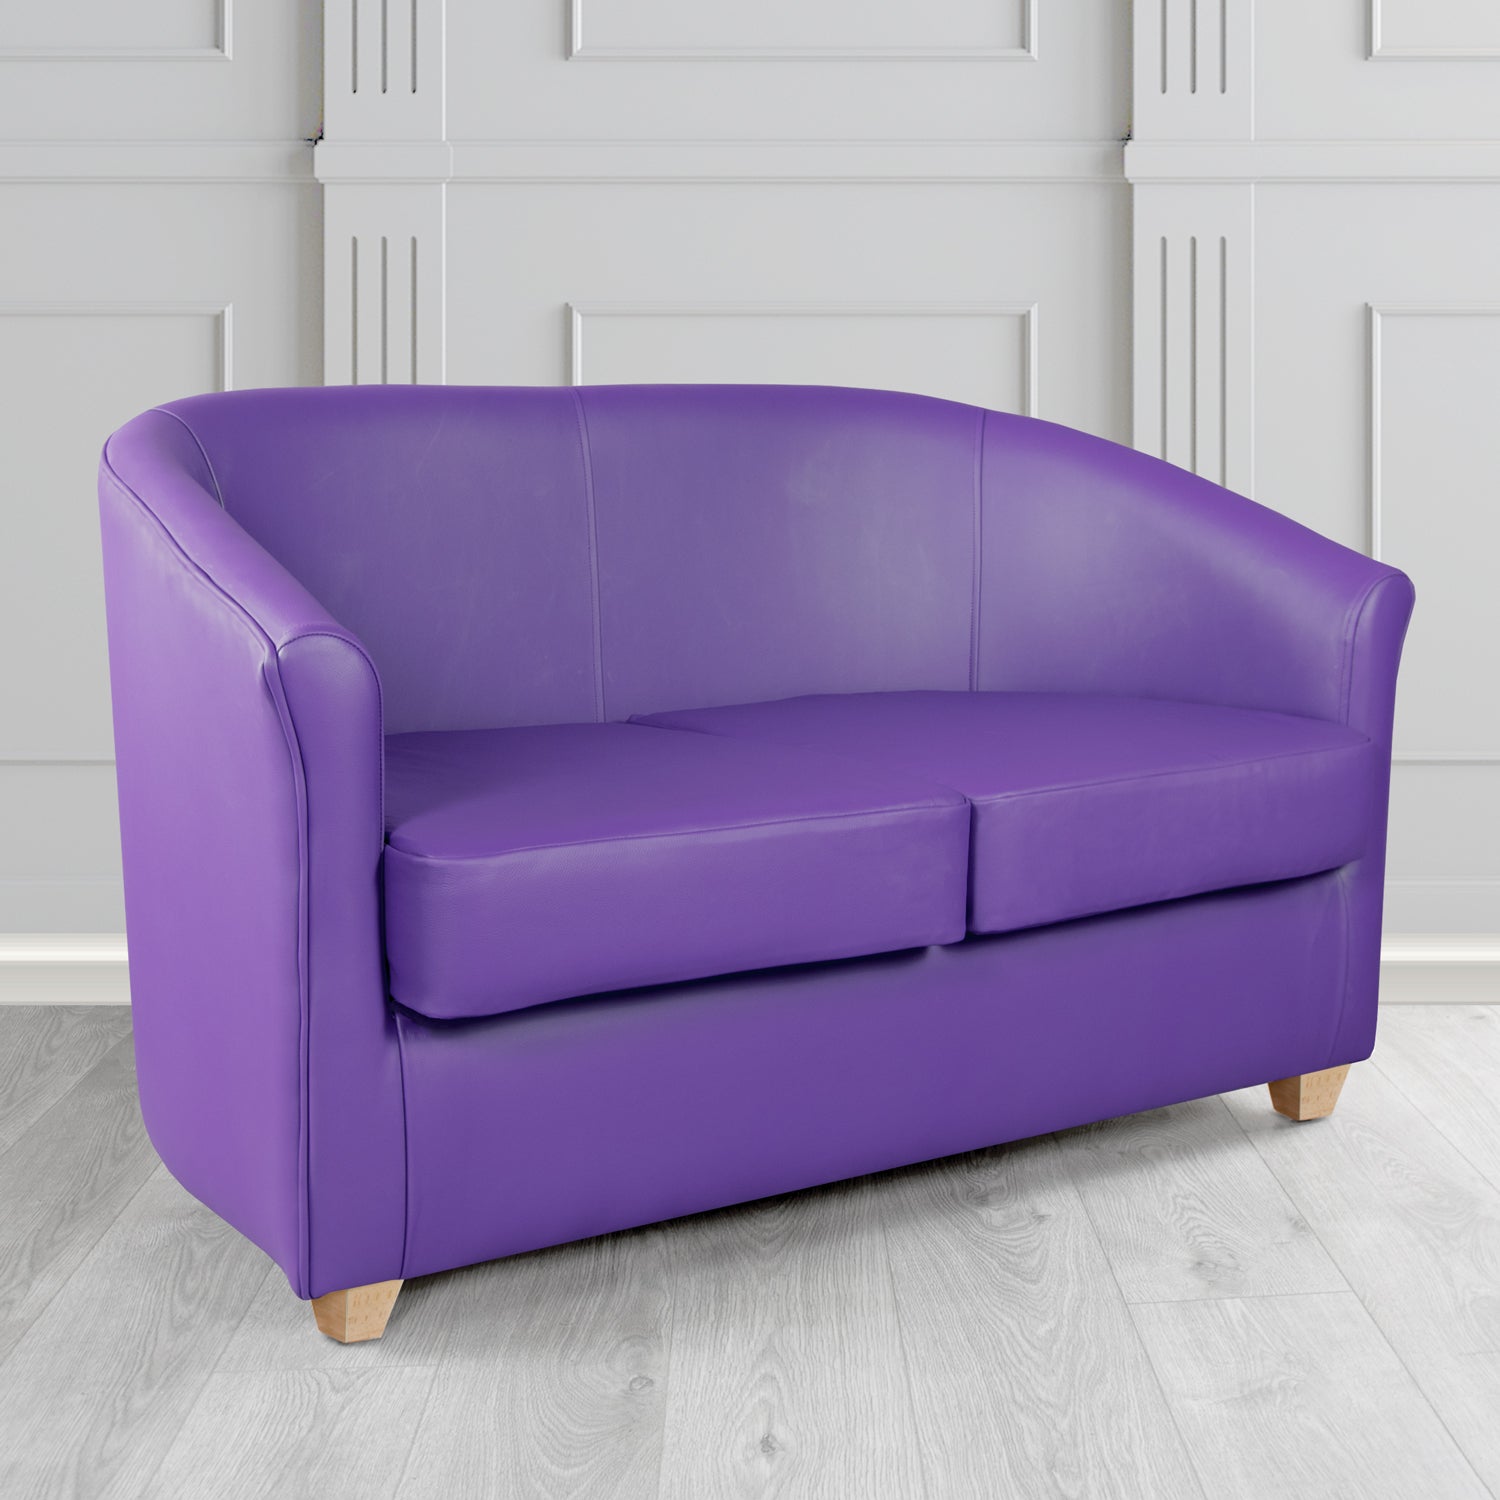 Cannes 2 Seater Tub Sofa in Just Colour Ultraviolet Crib 5 Faux Leather - The Tub Chair Shop